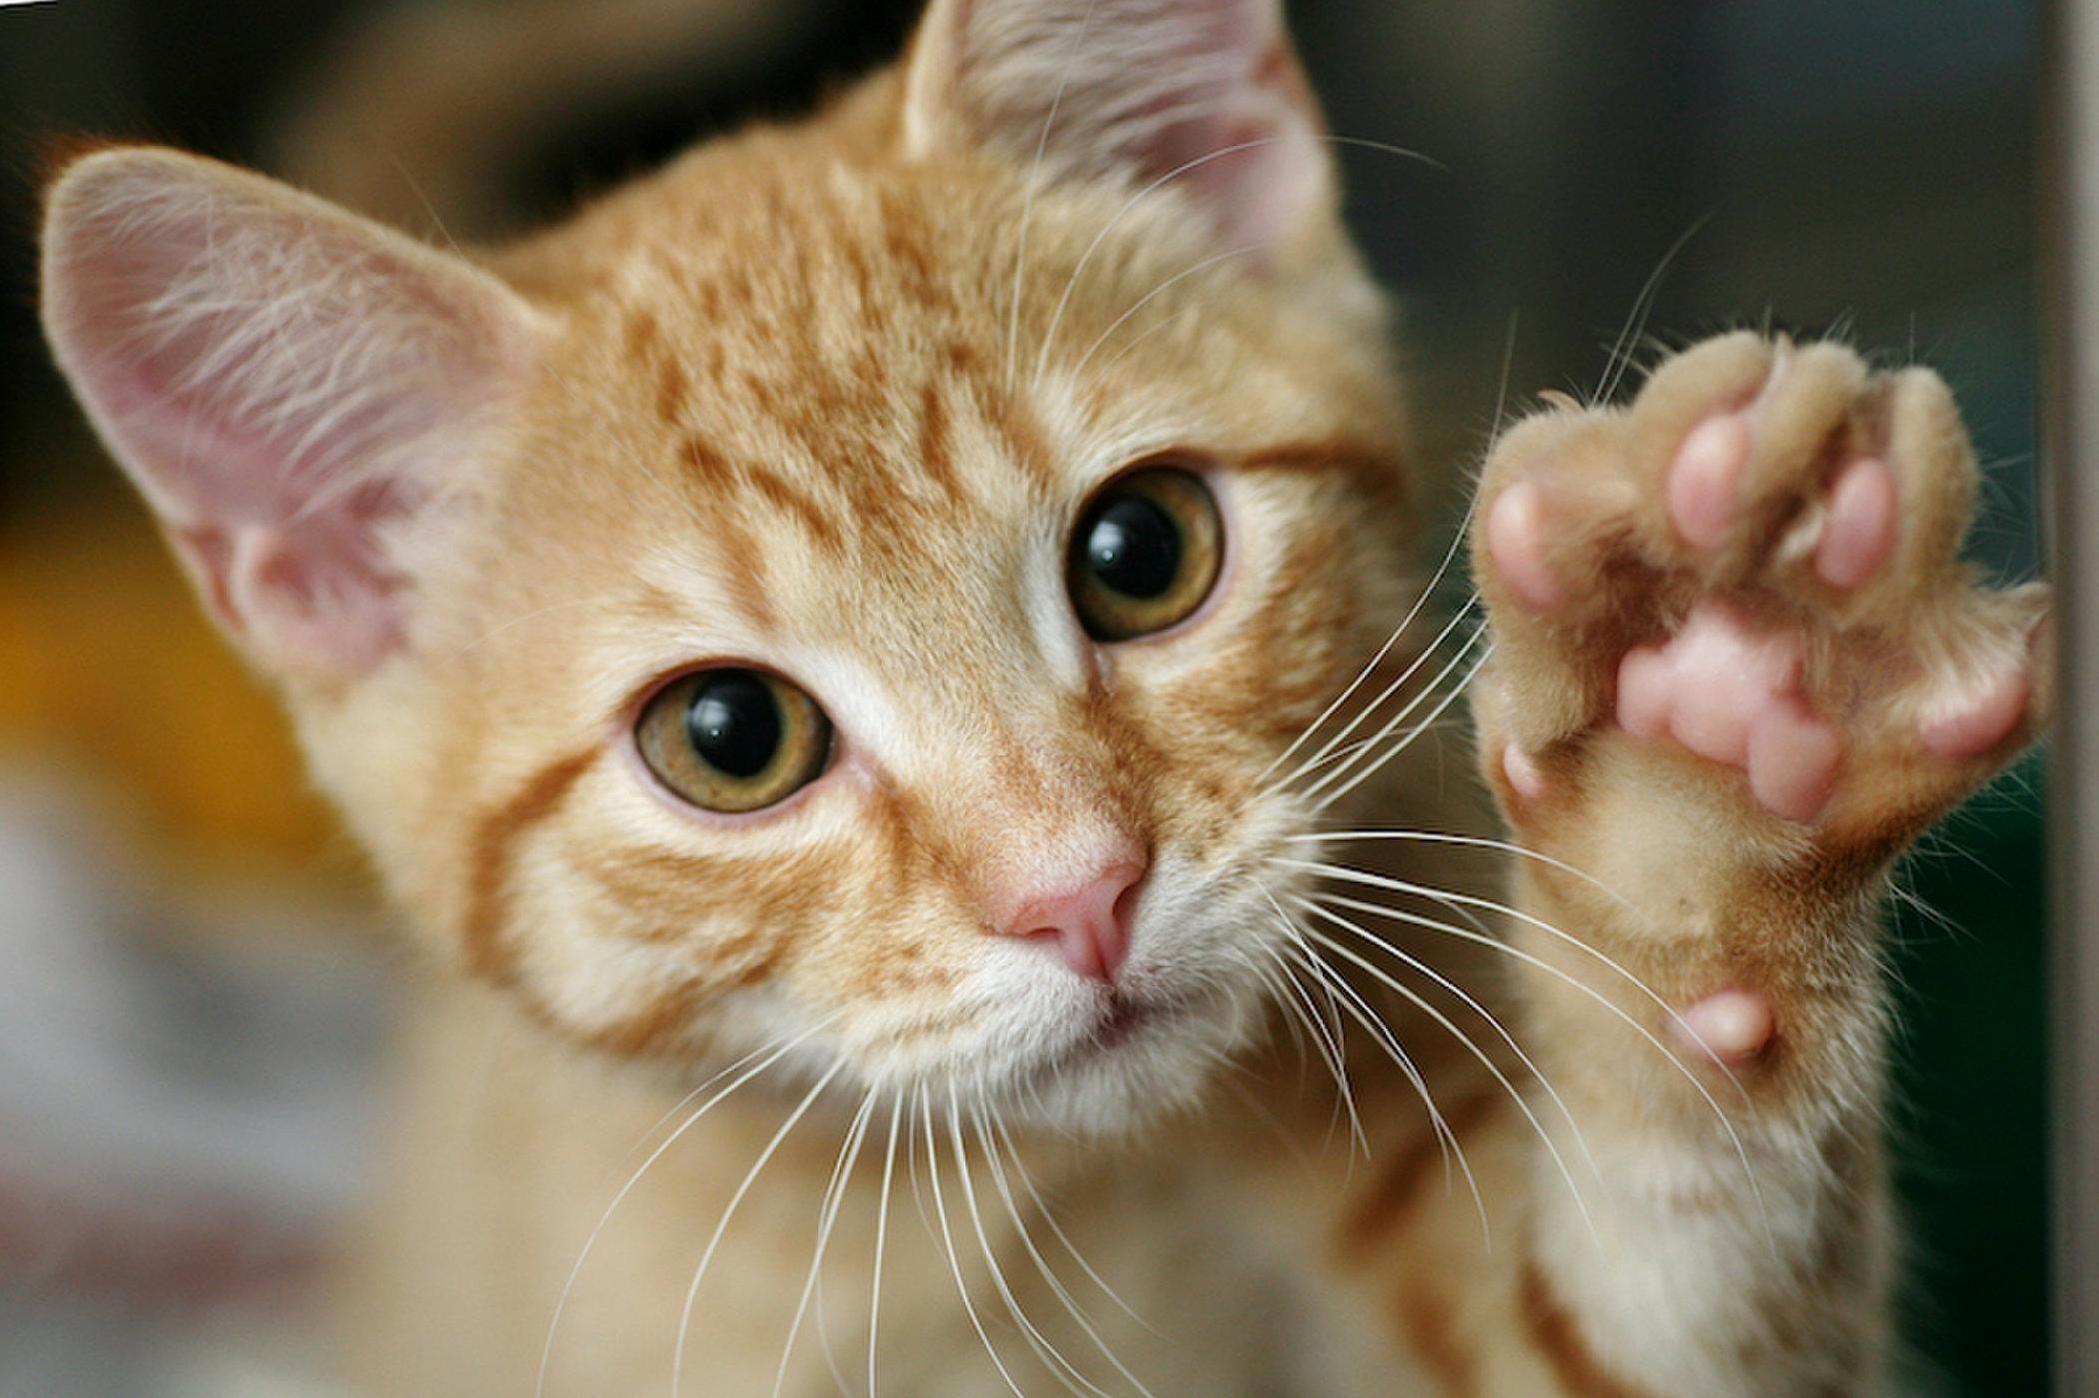 If your cat swats with its left paw, its probably male